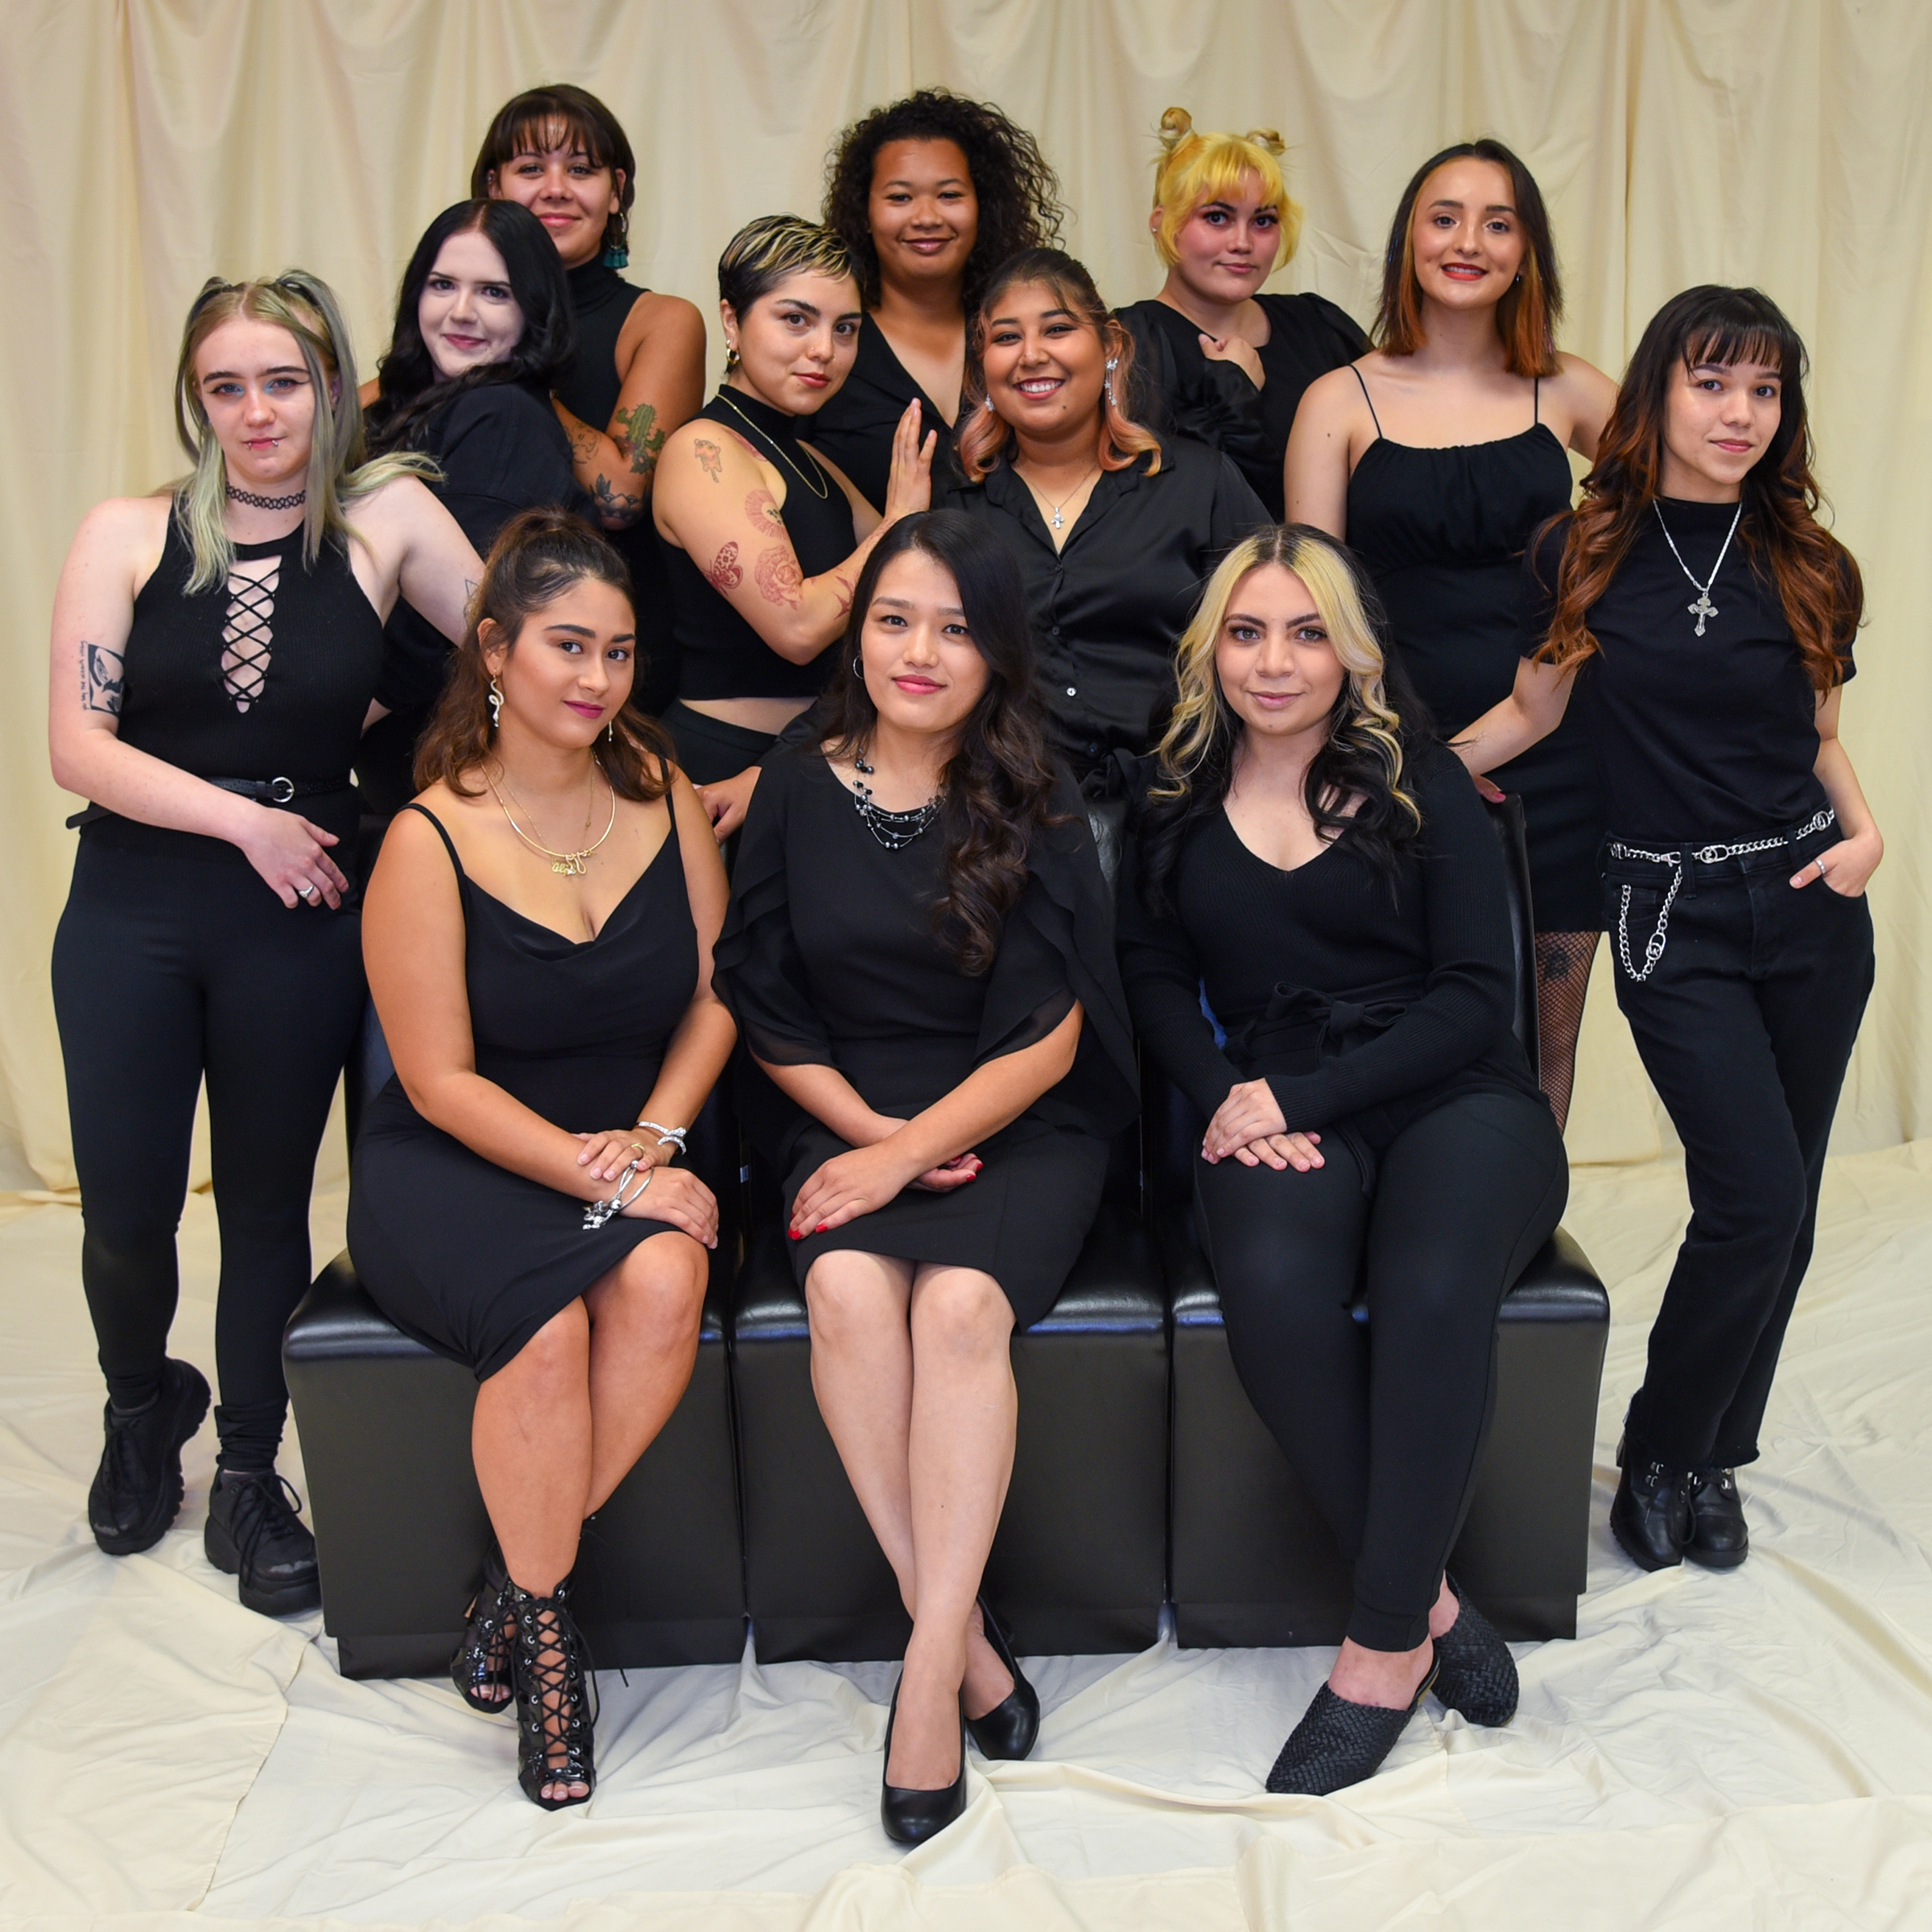 Galveston College Cosmetology program students recently passed their licensing exams with flying colors. From top left, Lauren Anderson, D’Asia Williams and Perla Kovelskyi. Middle row from left, Molly Leach, Kirstin Altamirano, Bryanna Tovar, Mariana Hernandez, Emily Prada and Abisai Moran. Seated from left, Olga Vasquez, Chanda Magar and Joselyn Delgado.